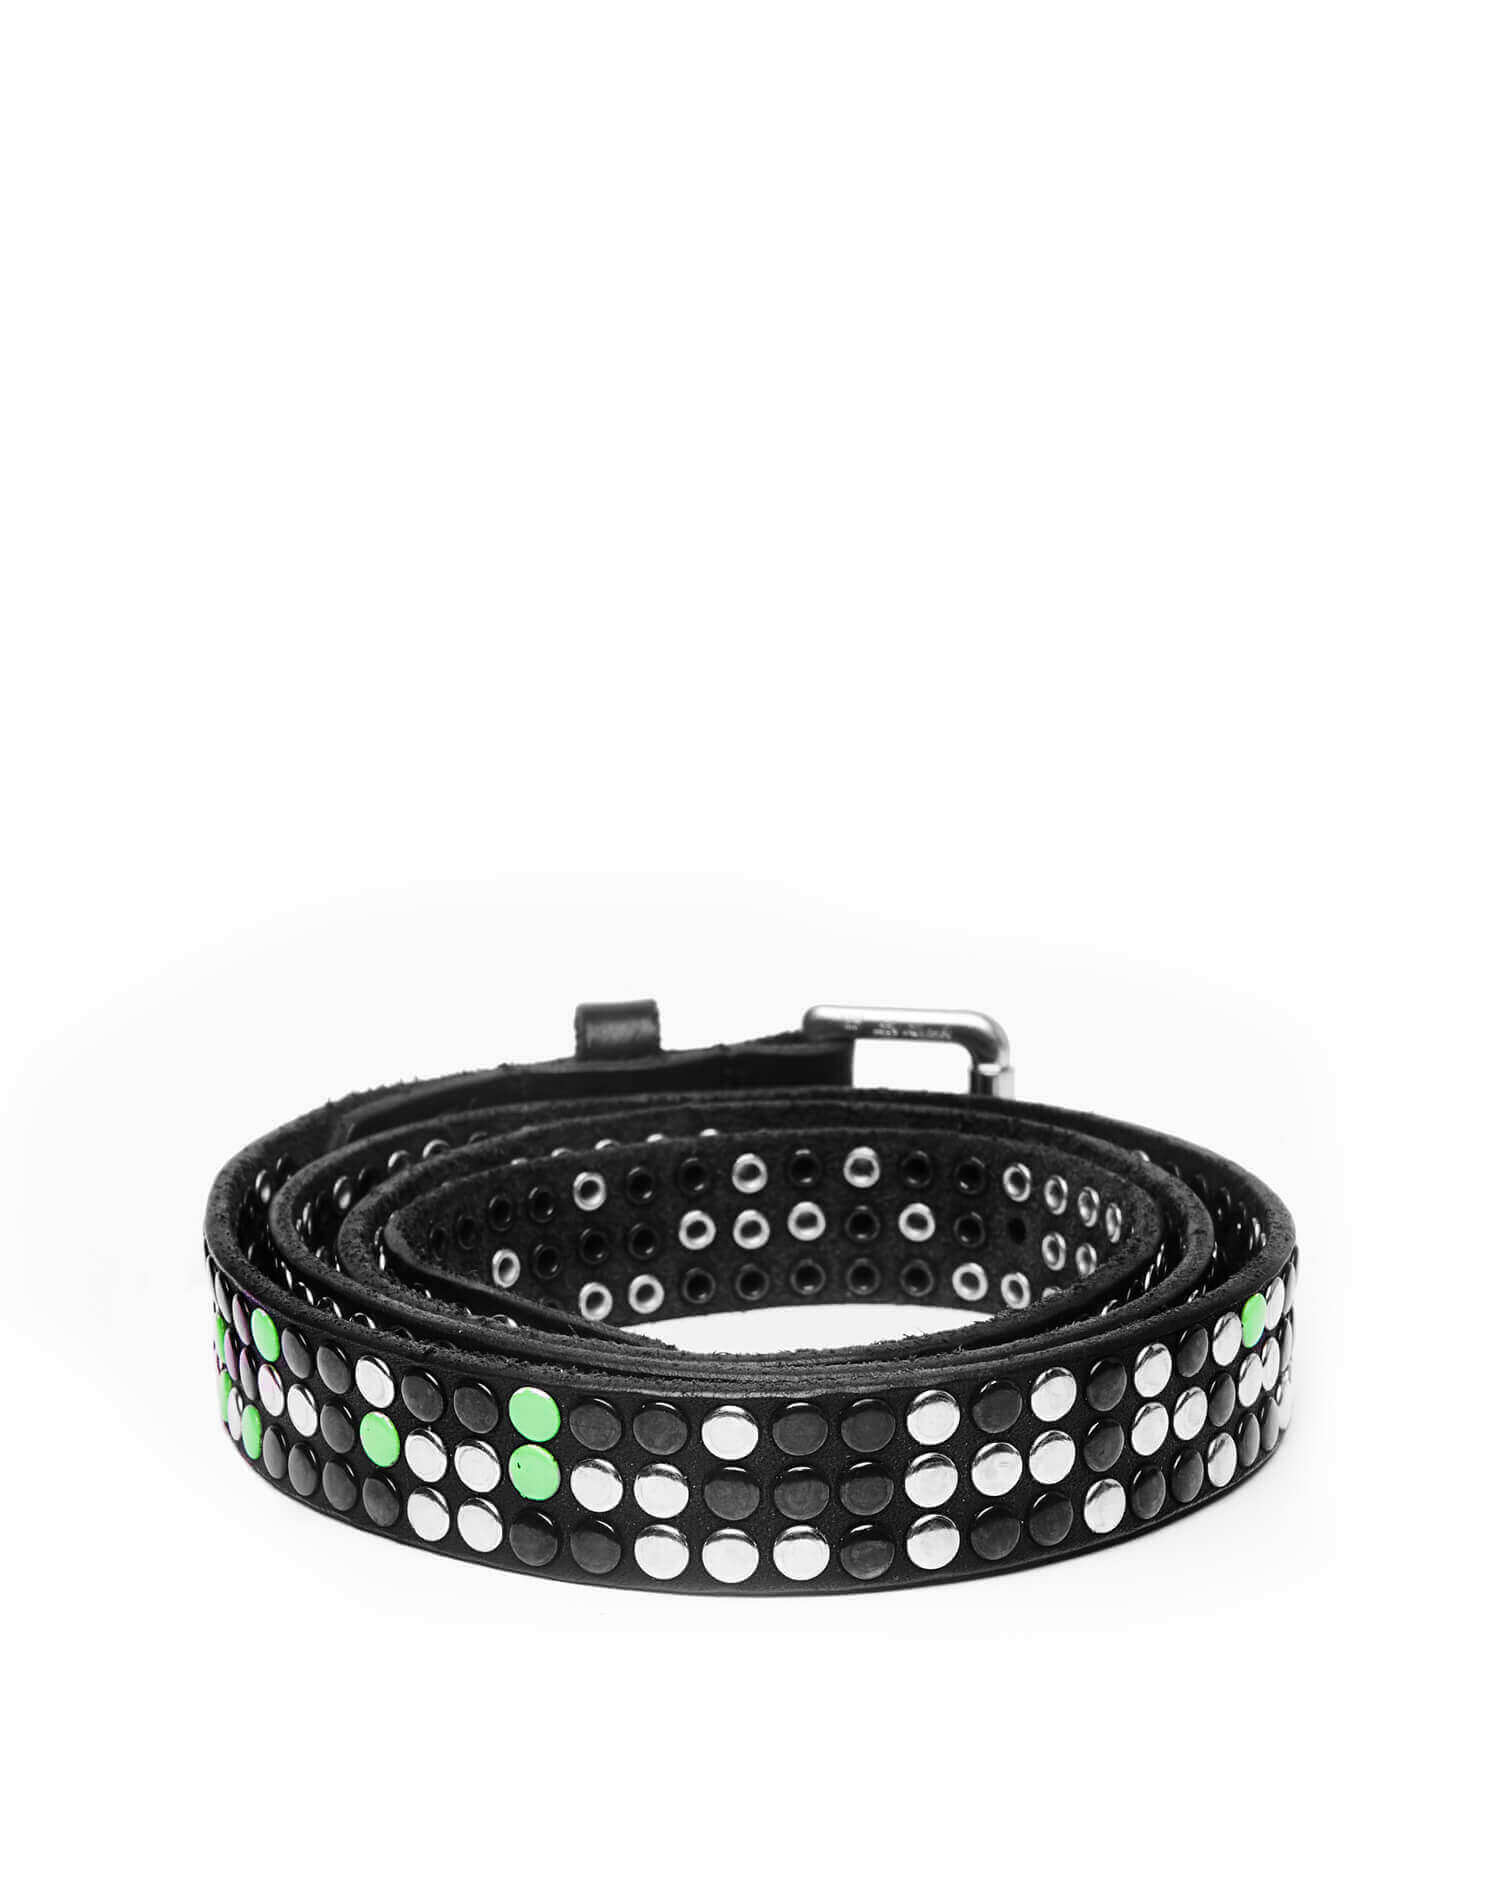 3.000 STUDS VARNISH BELT Black leather belt with studs, brass buckle, studded zamac belt loop and rivet with HTC logo. Height: 2 cm. Made in Italy. HTC LOS ANGELES